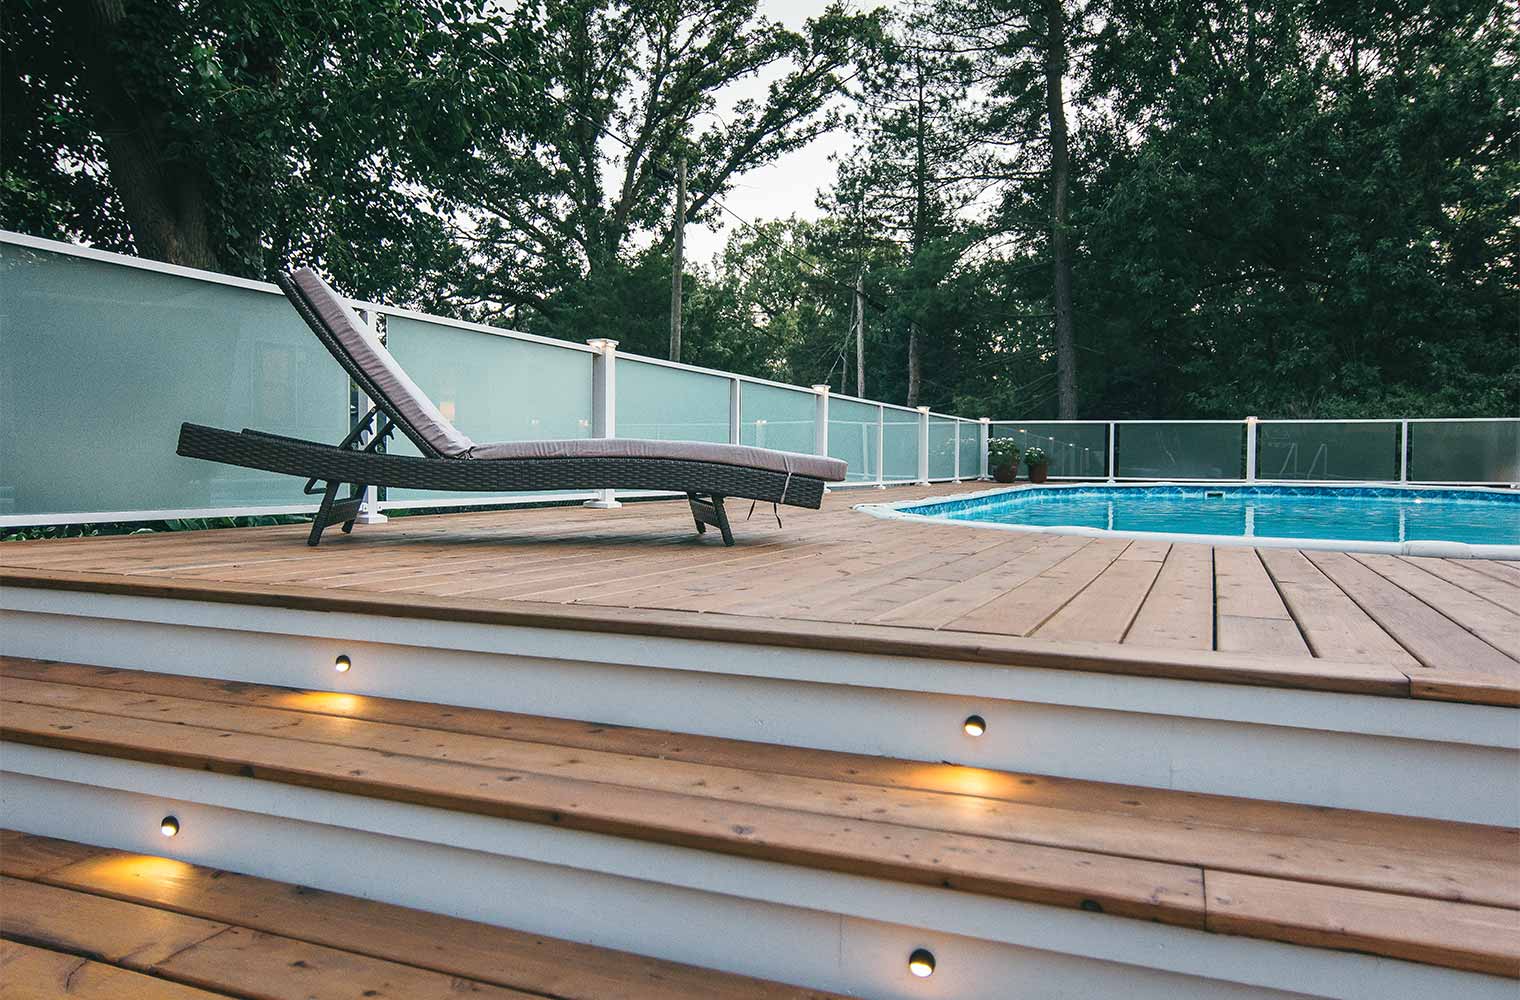 cedar pool decking and frosted glass panels for railing on midcentury ranch home in Des Moines, Iowa by remodeler Silent Rivers